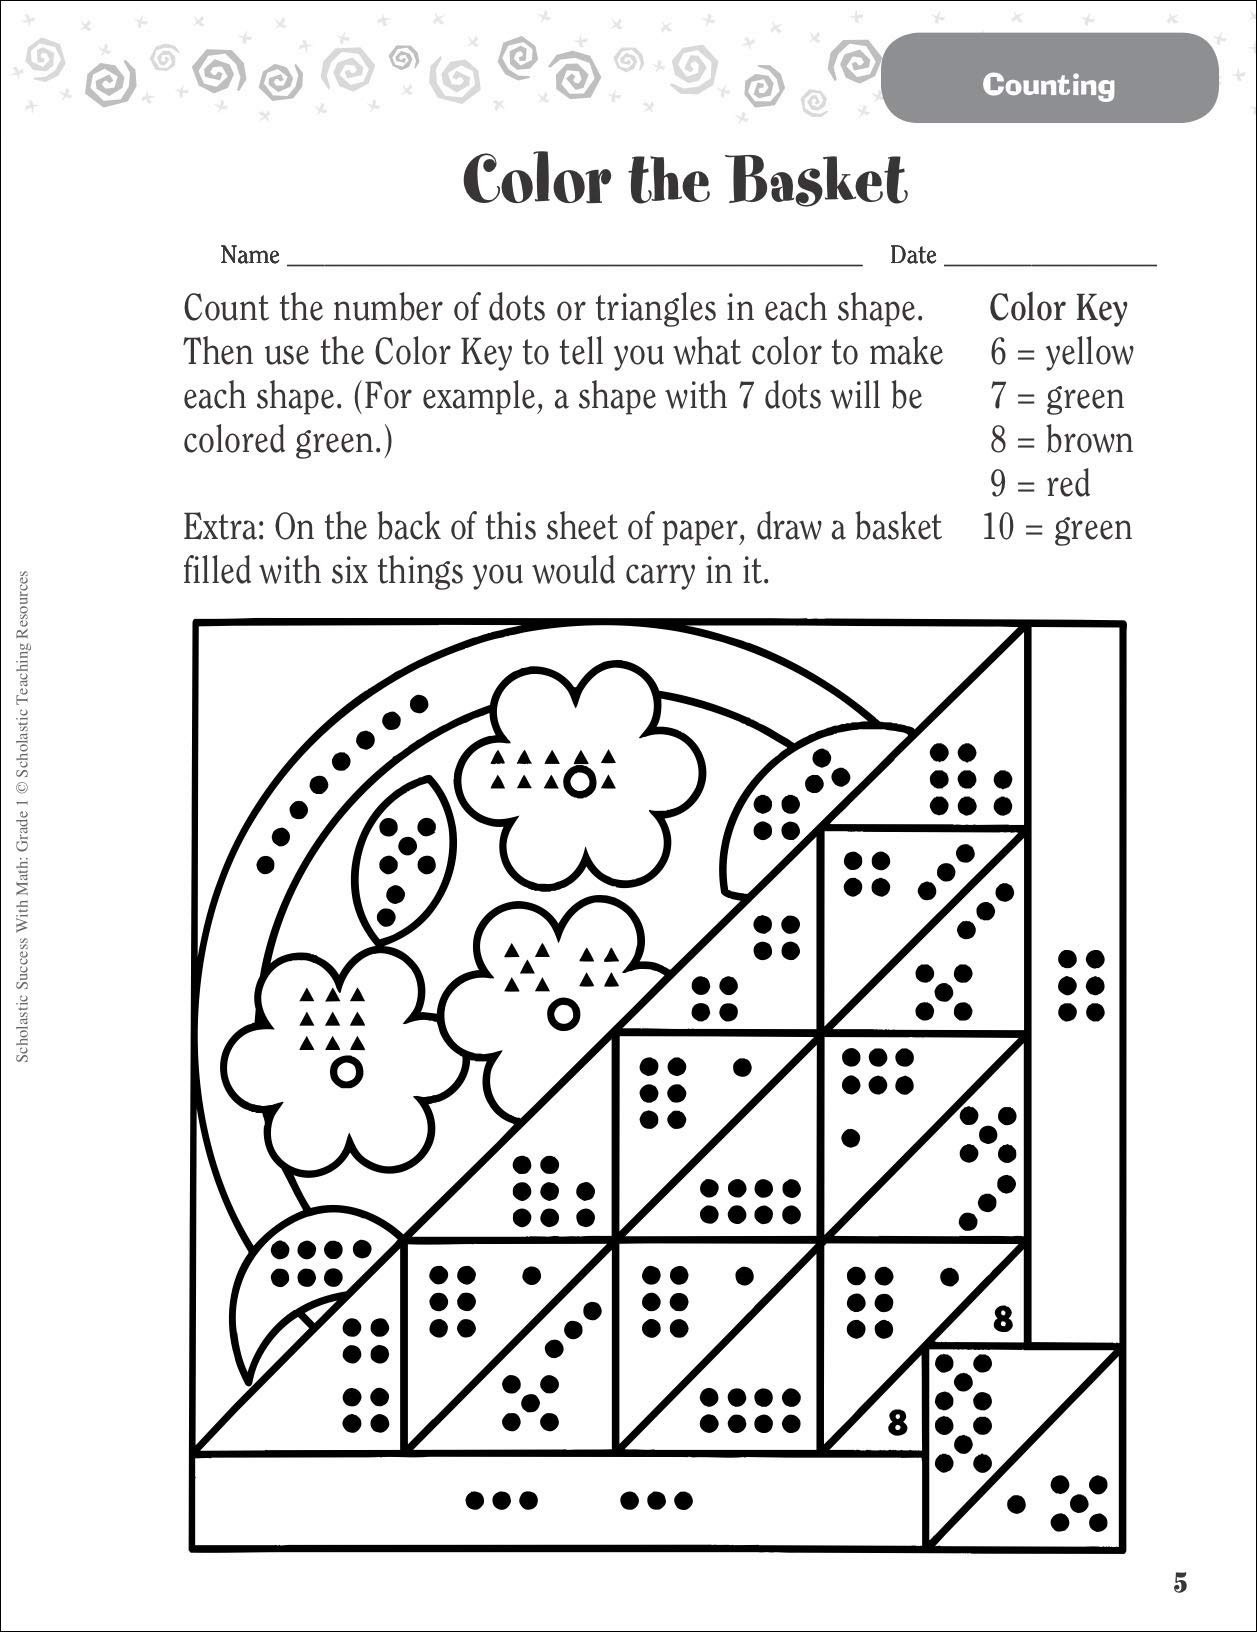 Free Math Worksheets First Grade 1 Subtraction Subtracting 1 Digit From 2 Digit No Regrouping